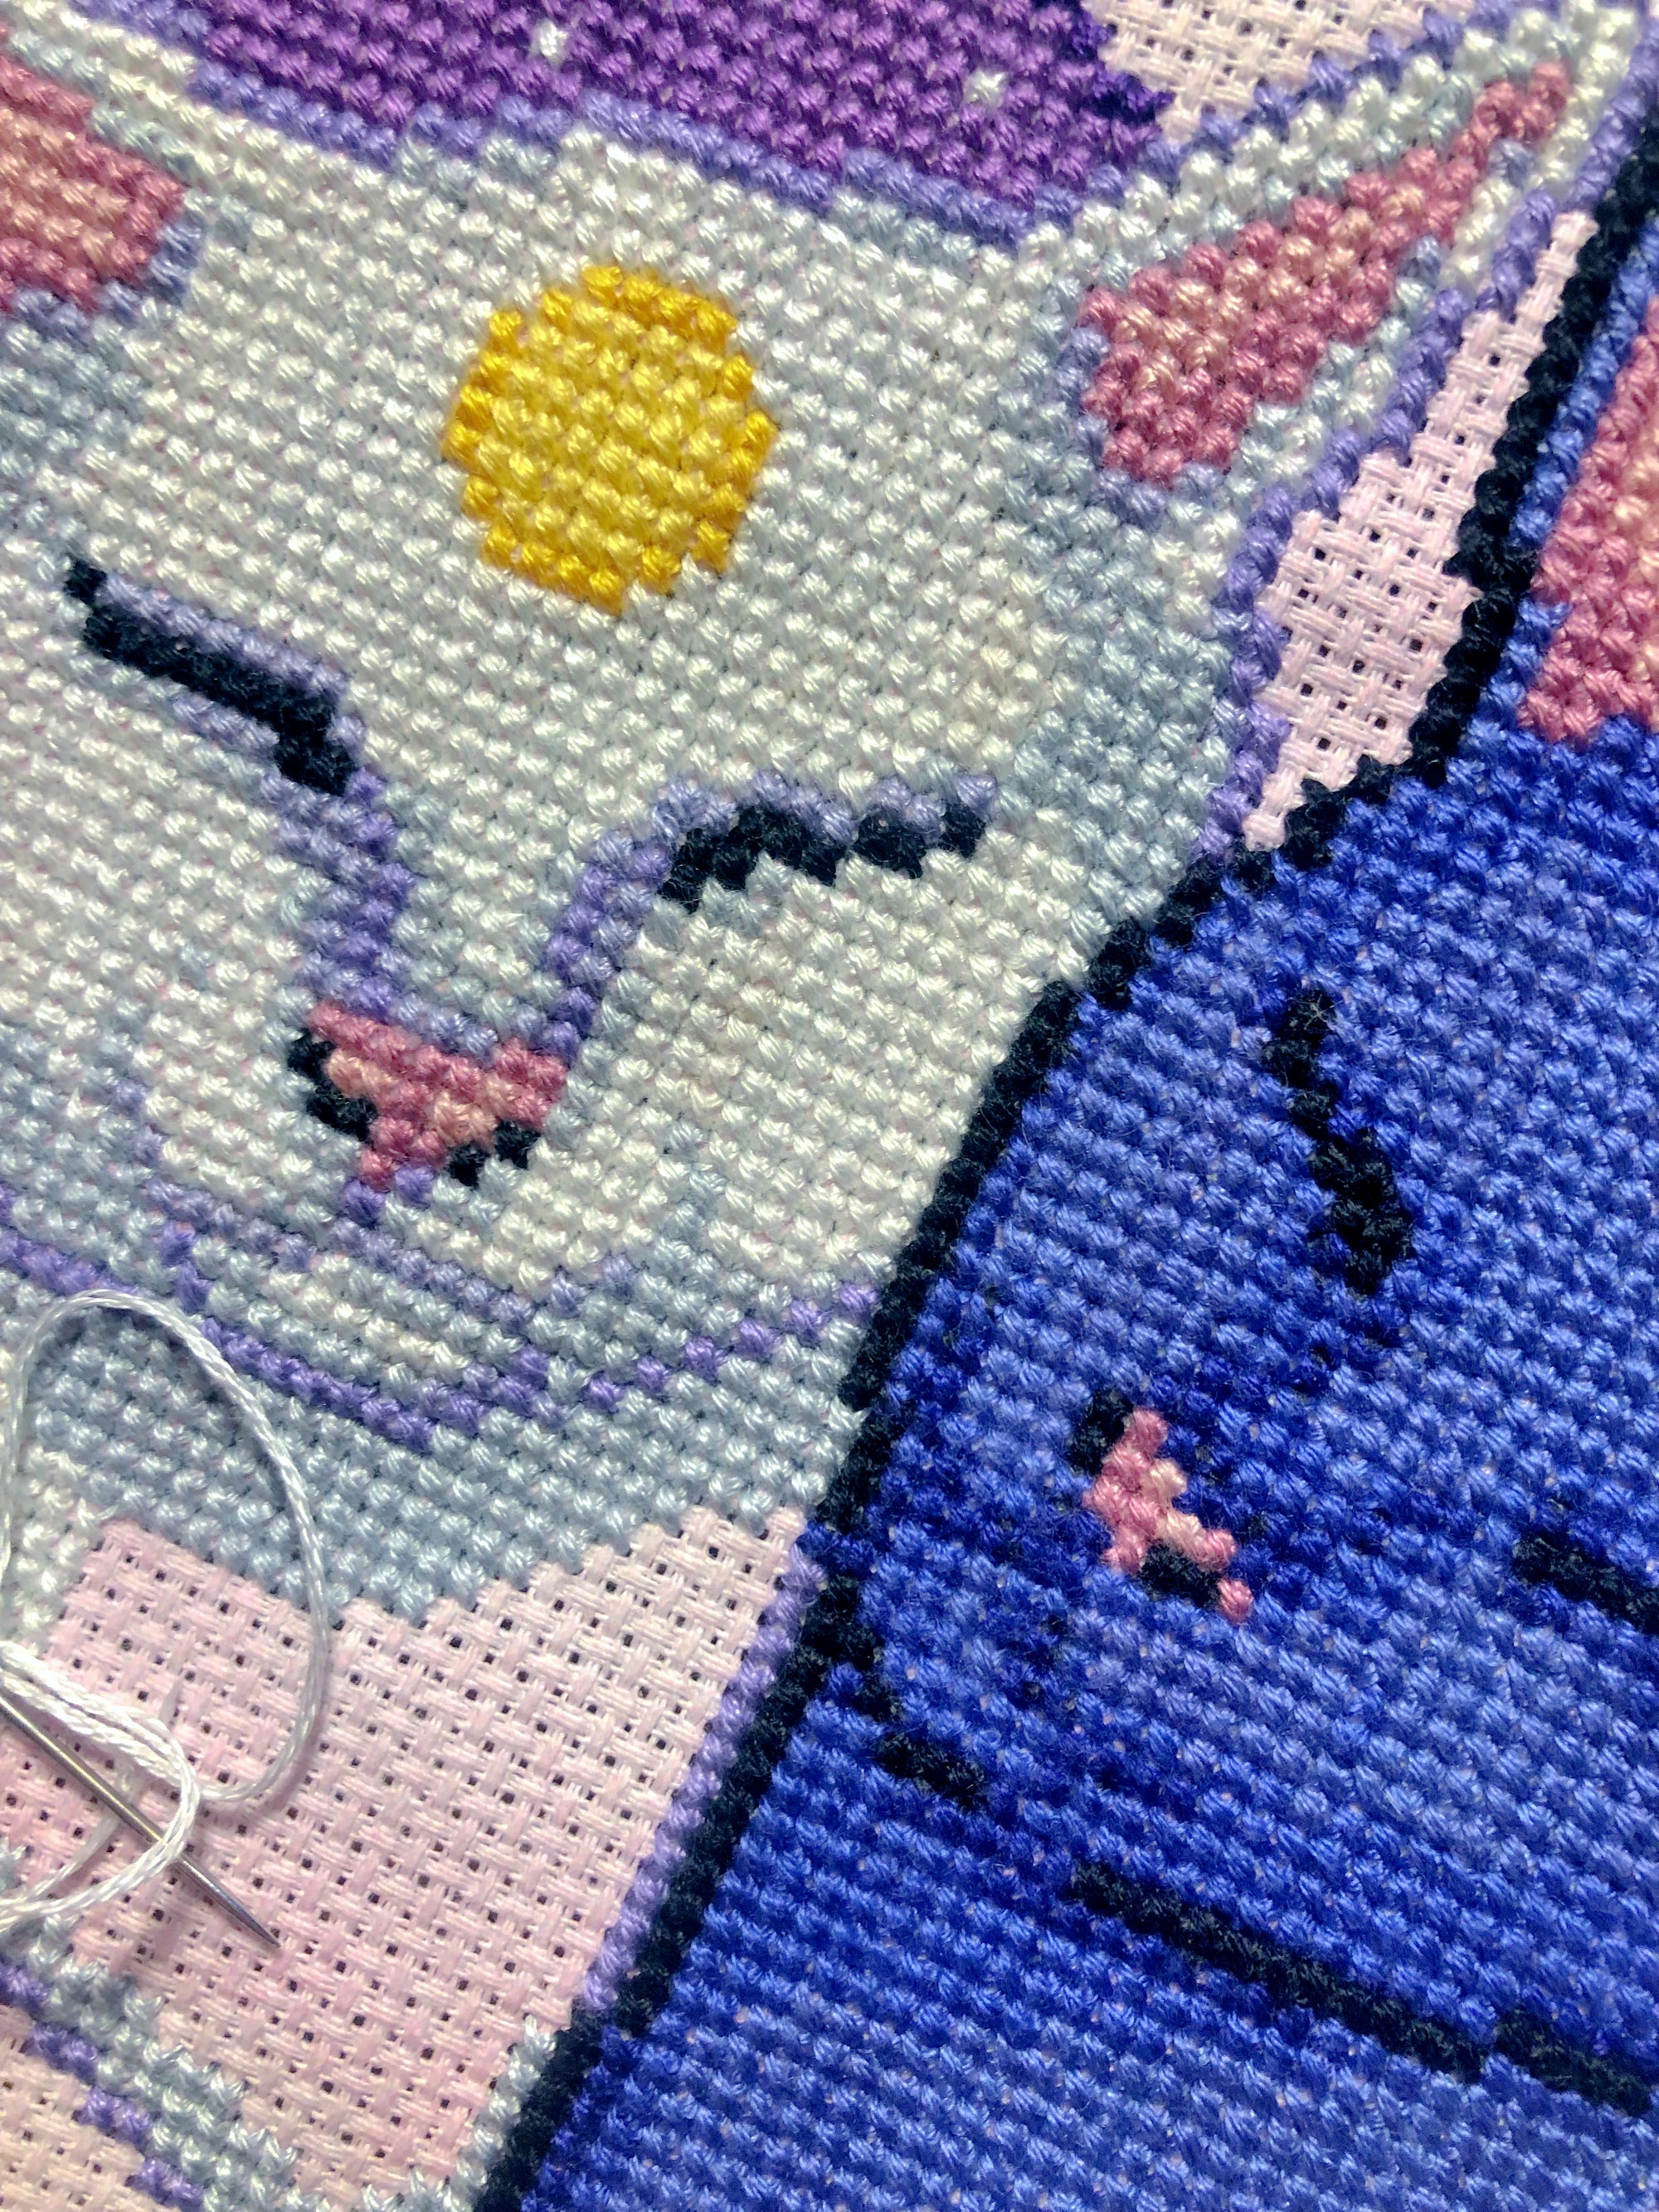 Extreme closeup of Sun and Moon cats cross stitch pattern and picture of the work in progress, with needle and thread displayed. Both cats have their eyes closed. Stitches are neat and tidy. Shading is done in complementary colors like lilac.